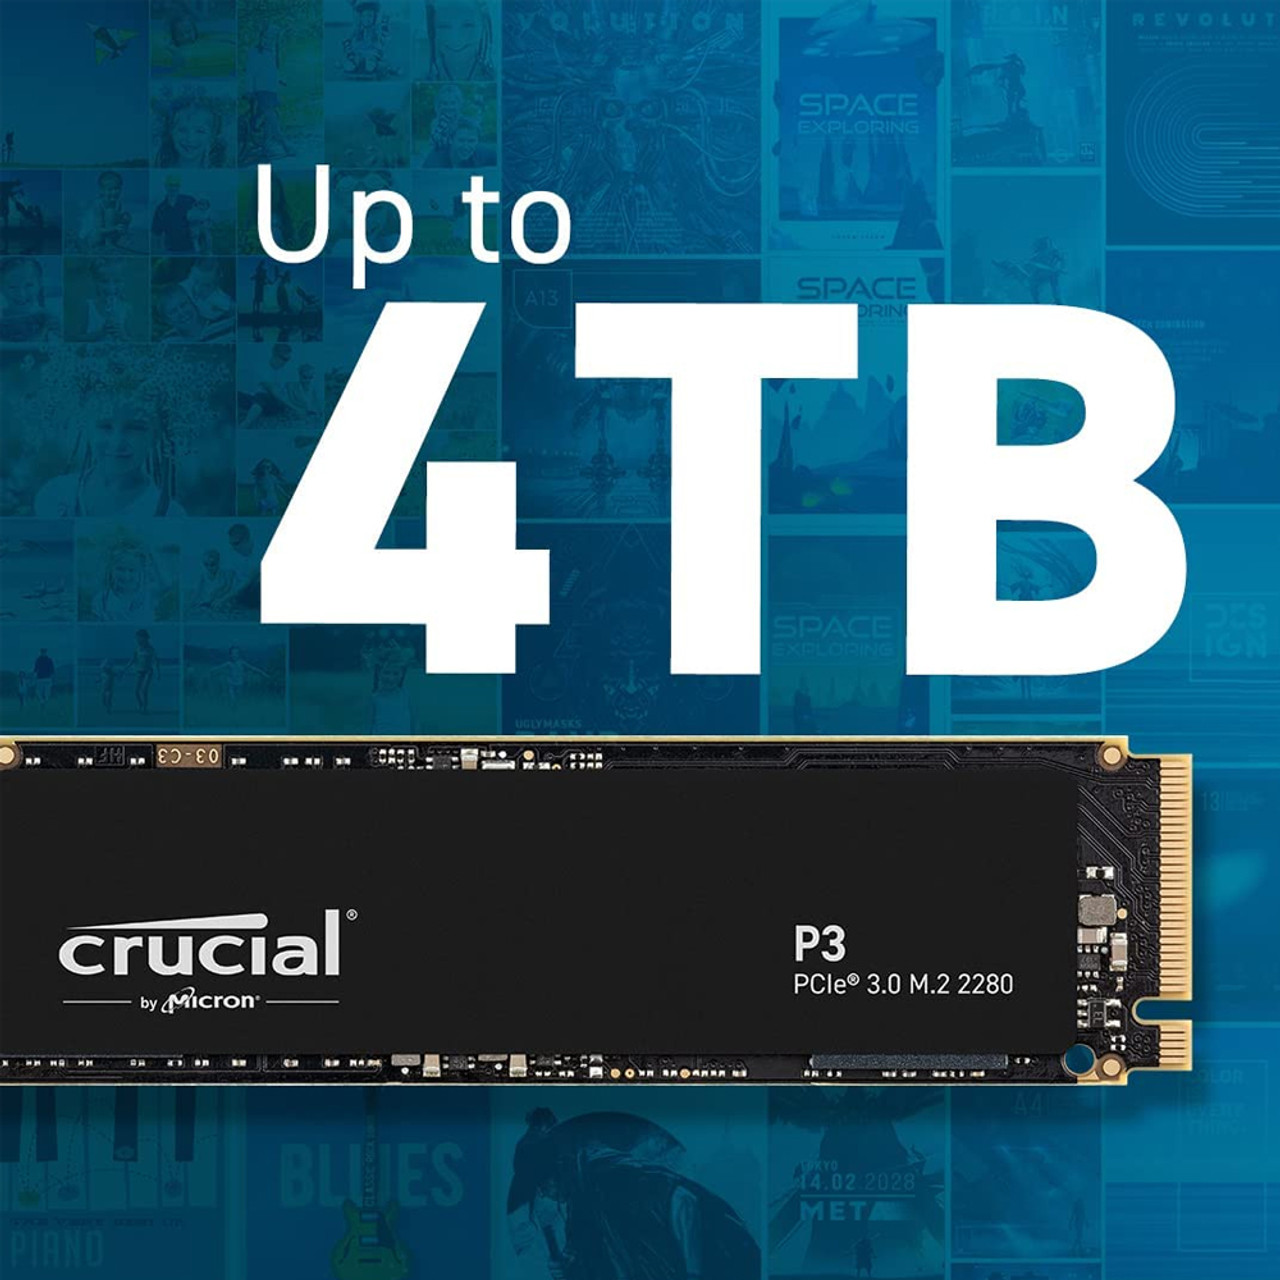 Crucial ‎CT1000P3SSD8 P3 1TB PCIe 3.0 3D NAND NVMe M.2 SSD, up to 3500MB/s Internal Solid State Drive